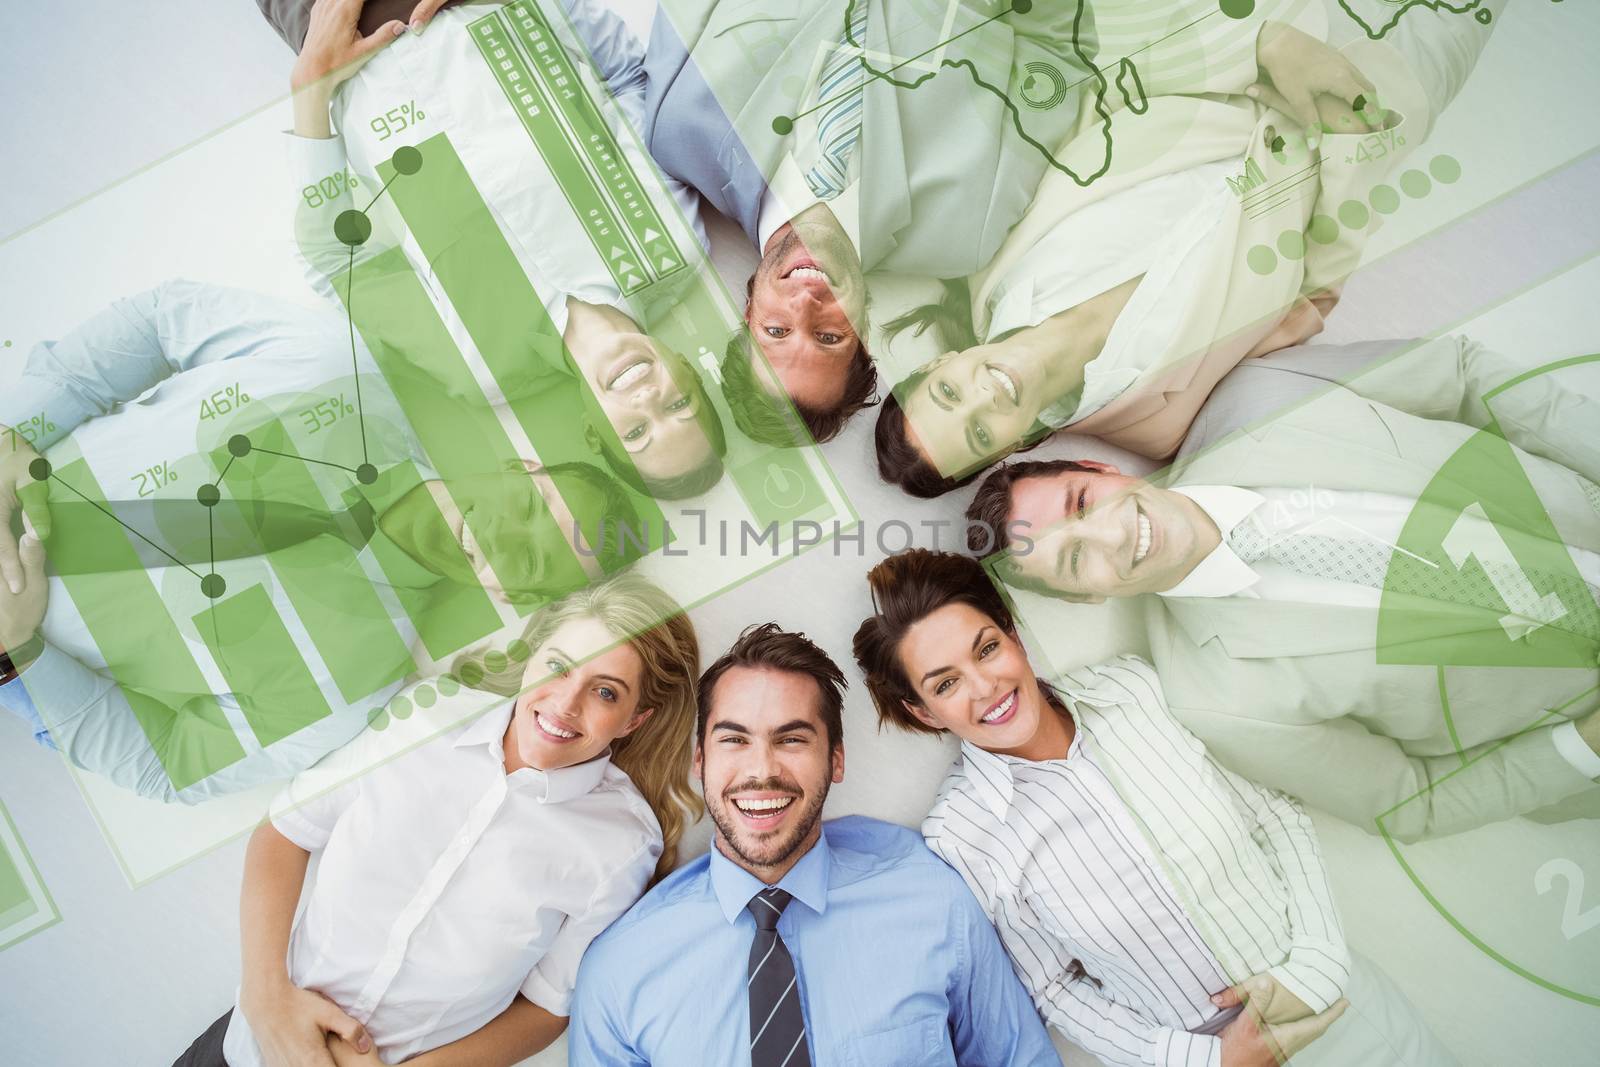 Young business people lying in circle against digitally generated image of pie chart and bar graph